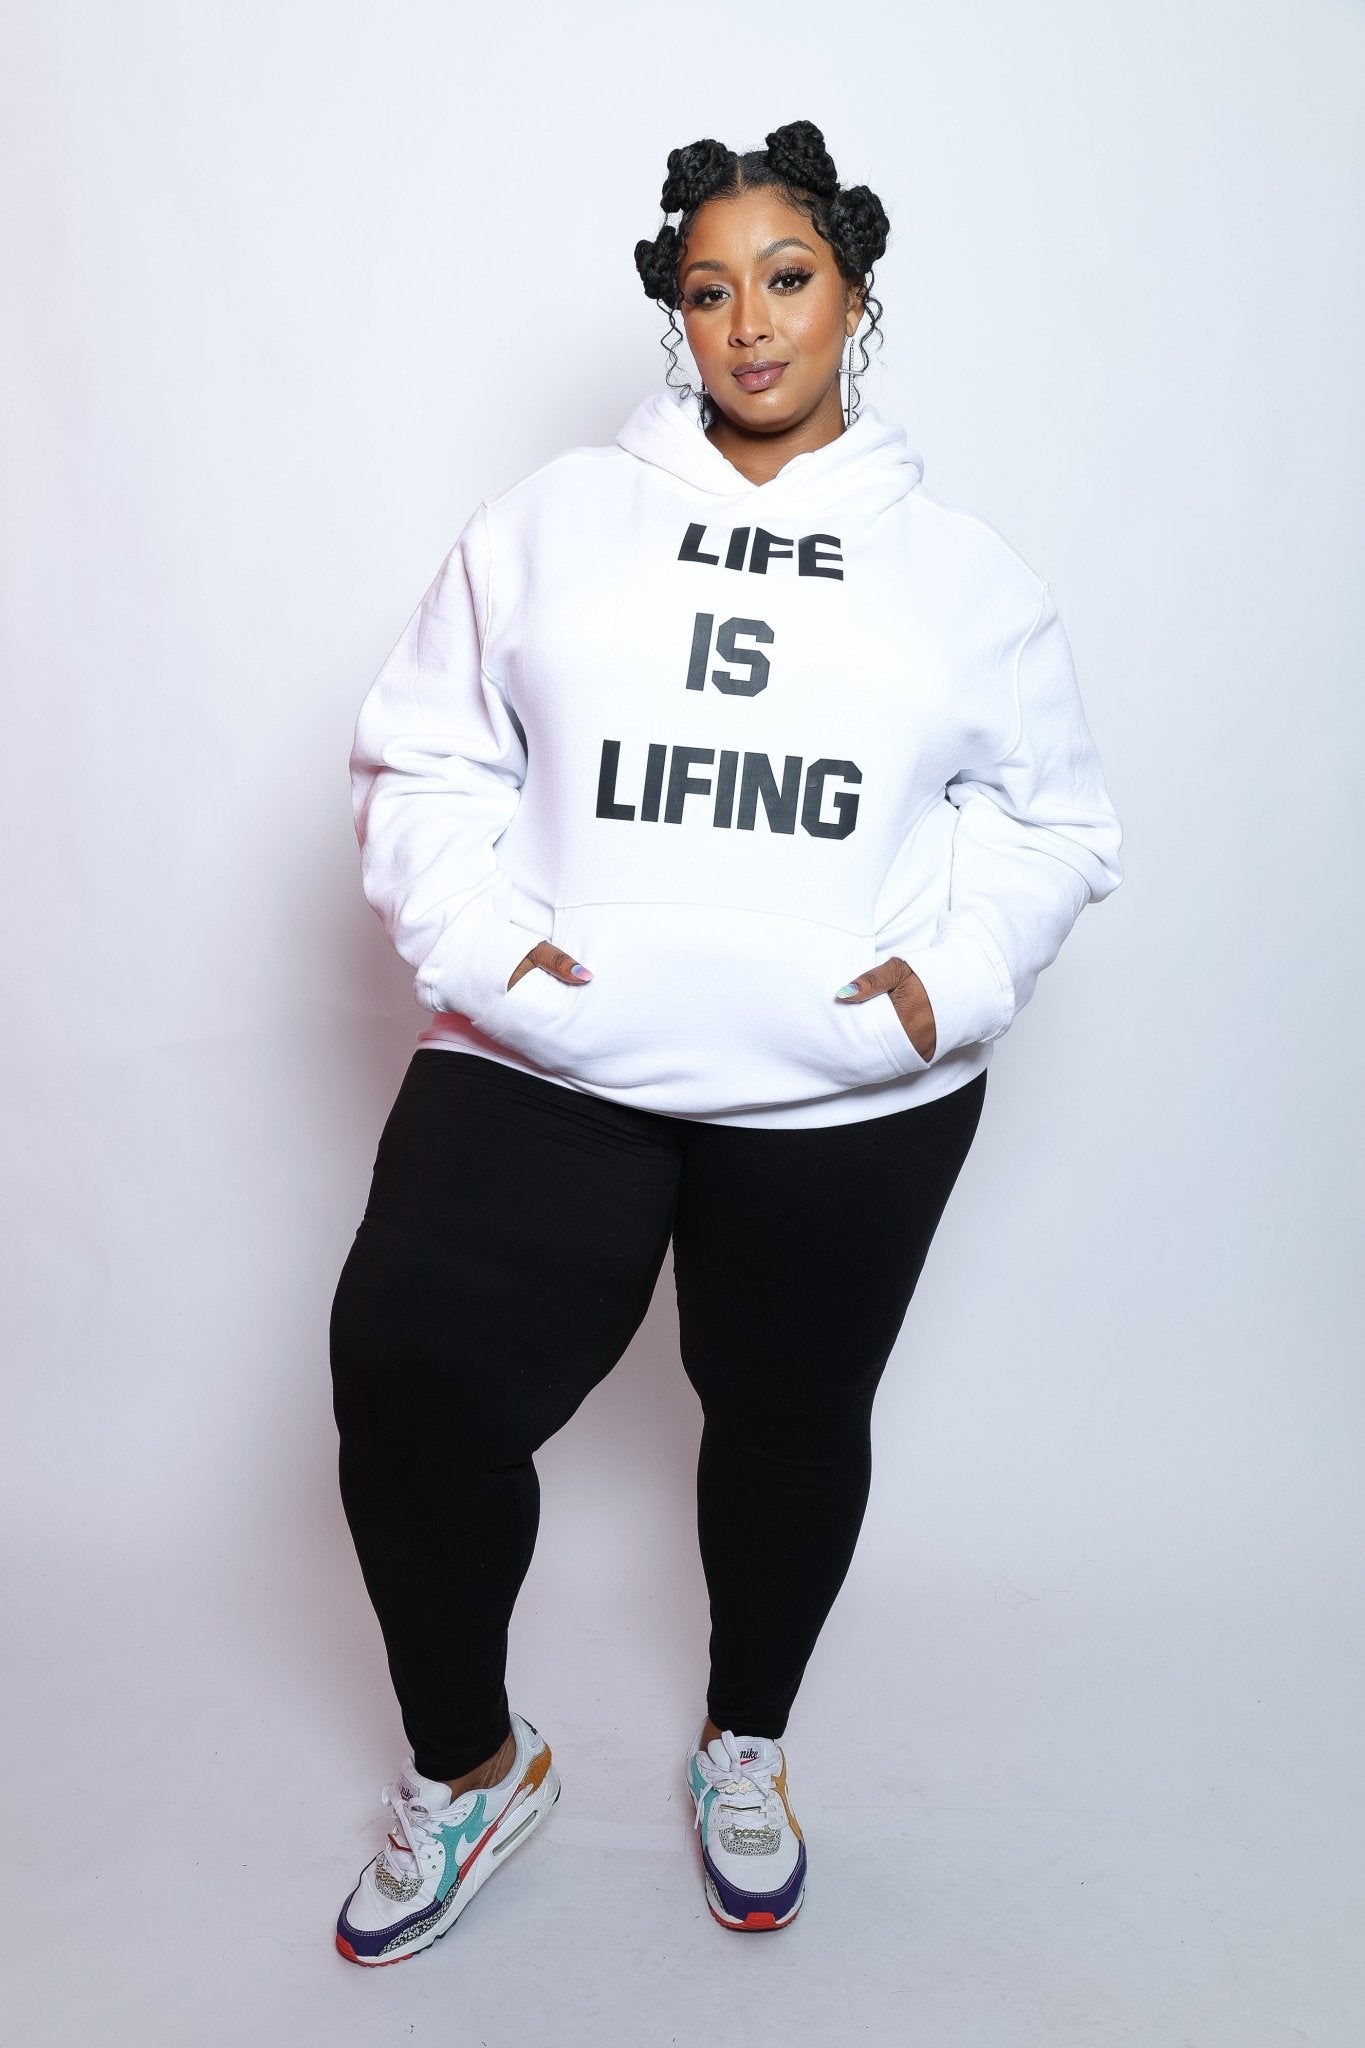 Life is Lifing Hoodie/Tee - House of FaSHUN by Shun Melson